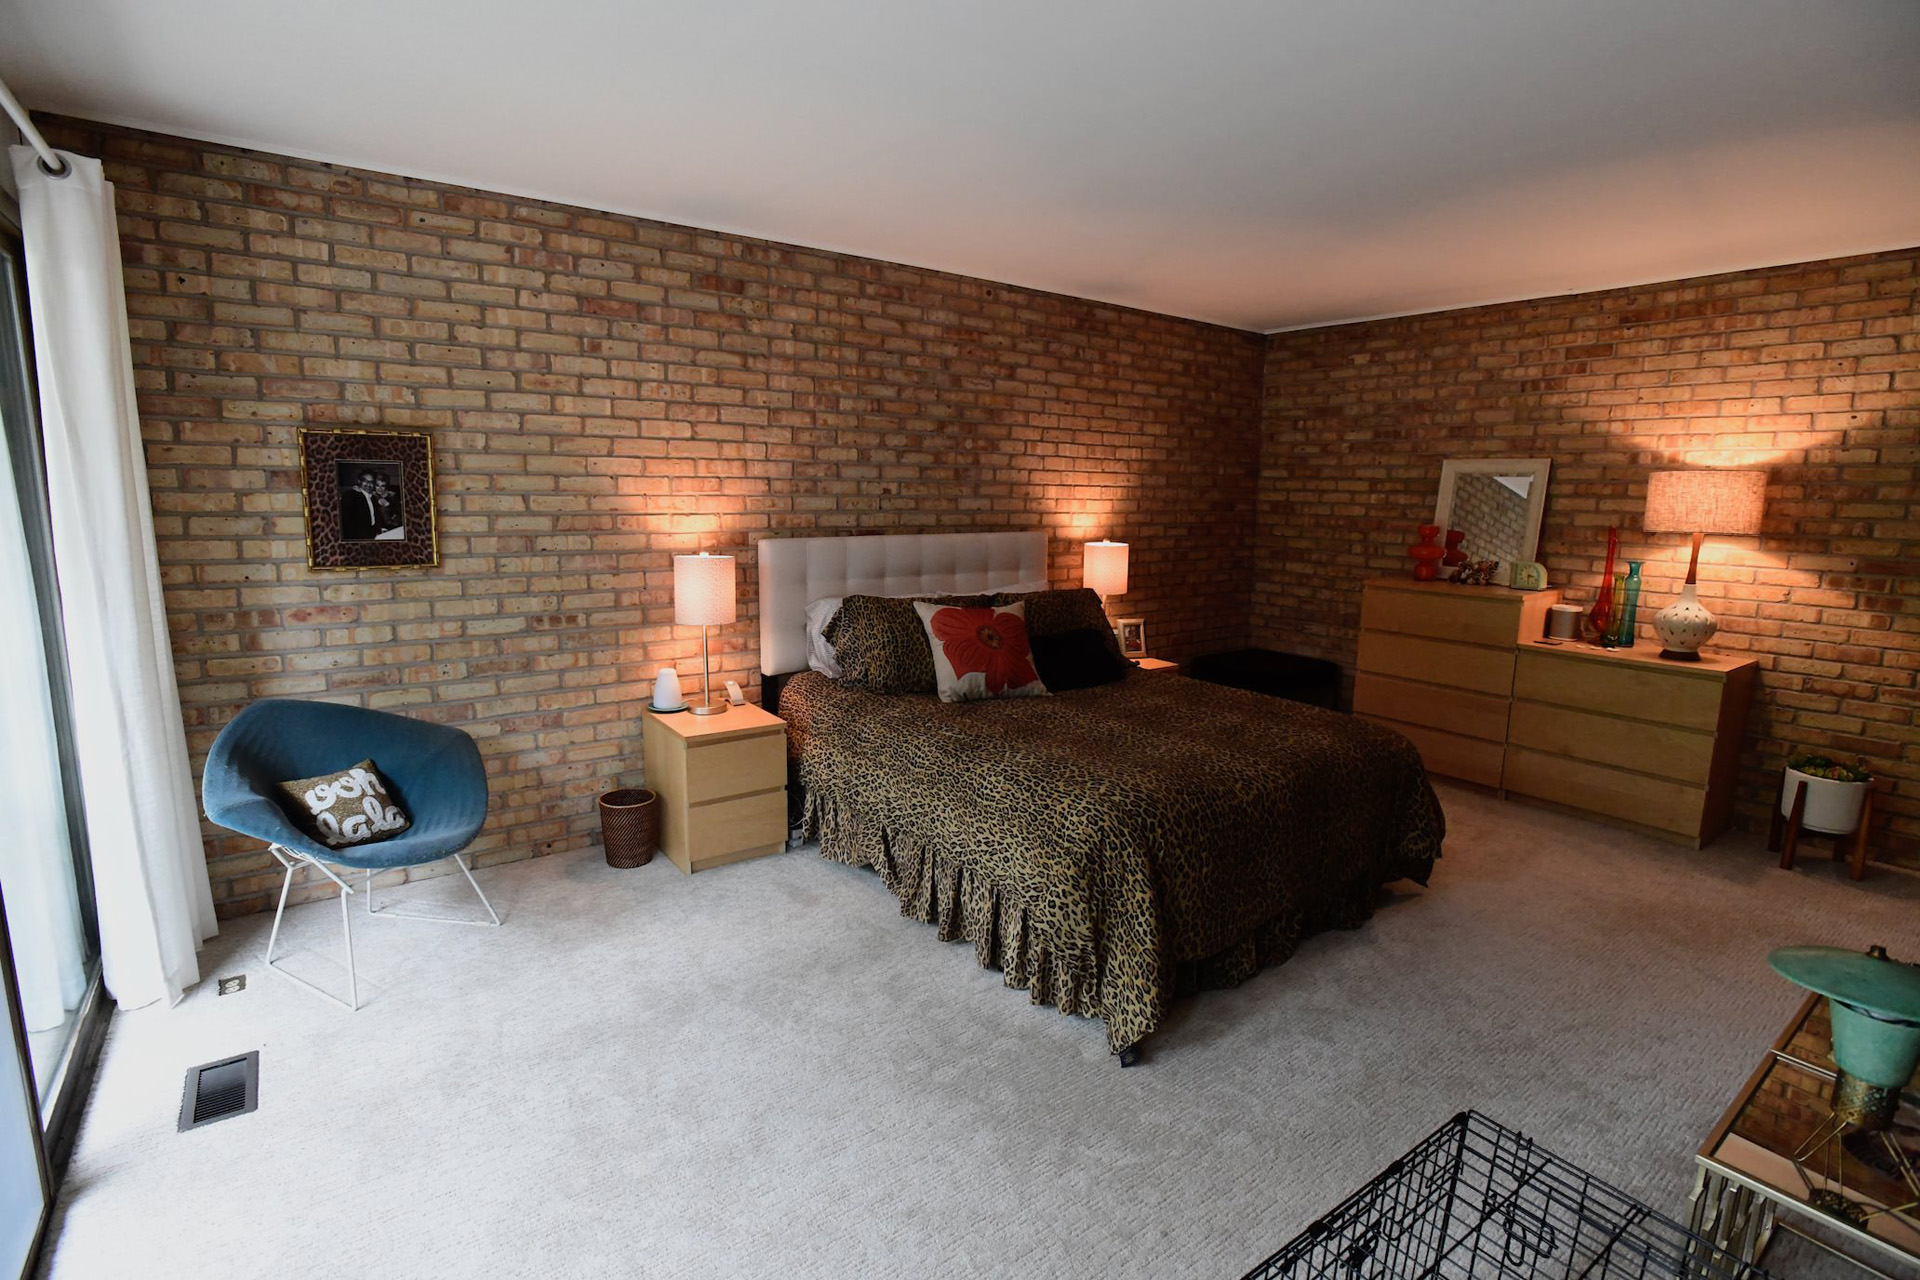 Exposed brick and wood walls (off camera) make for a very comfortable and cozy master suite